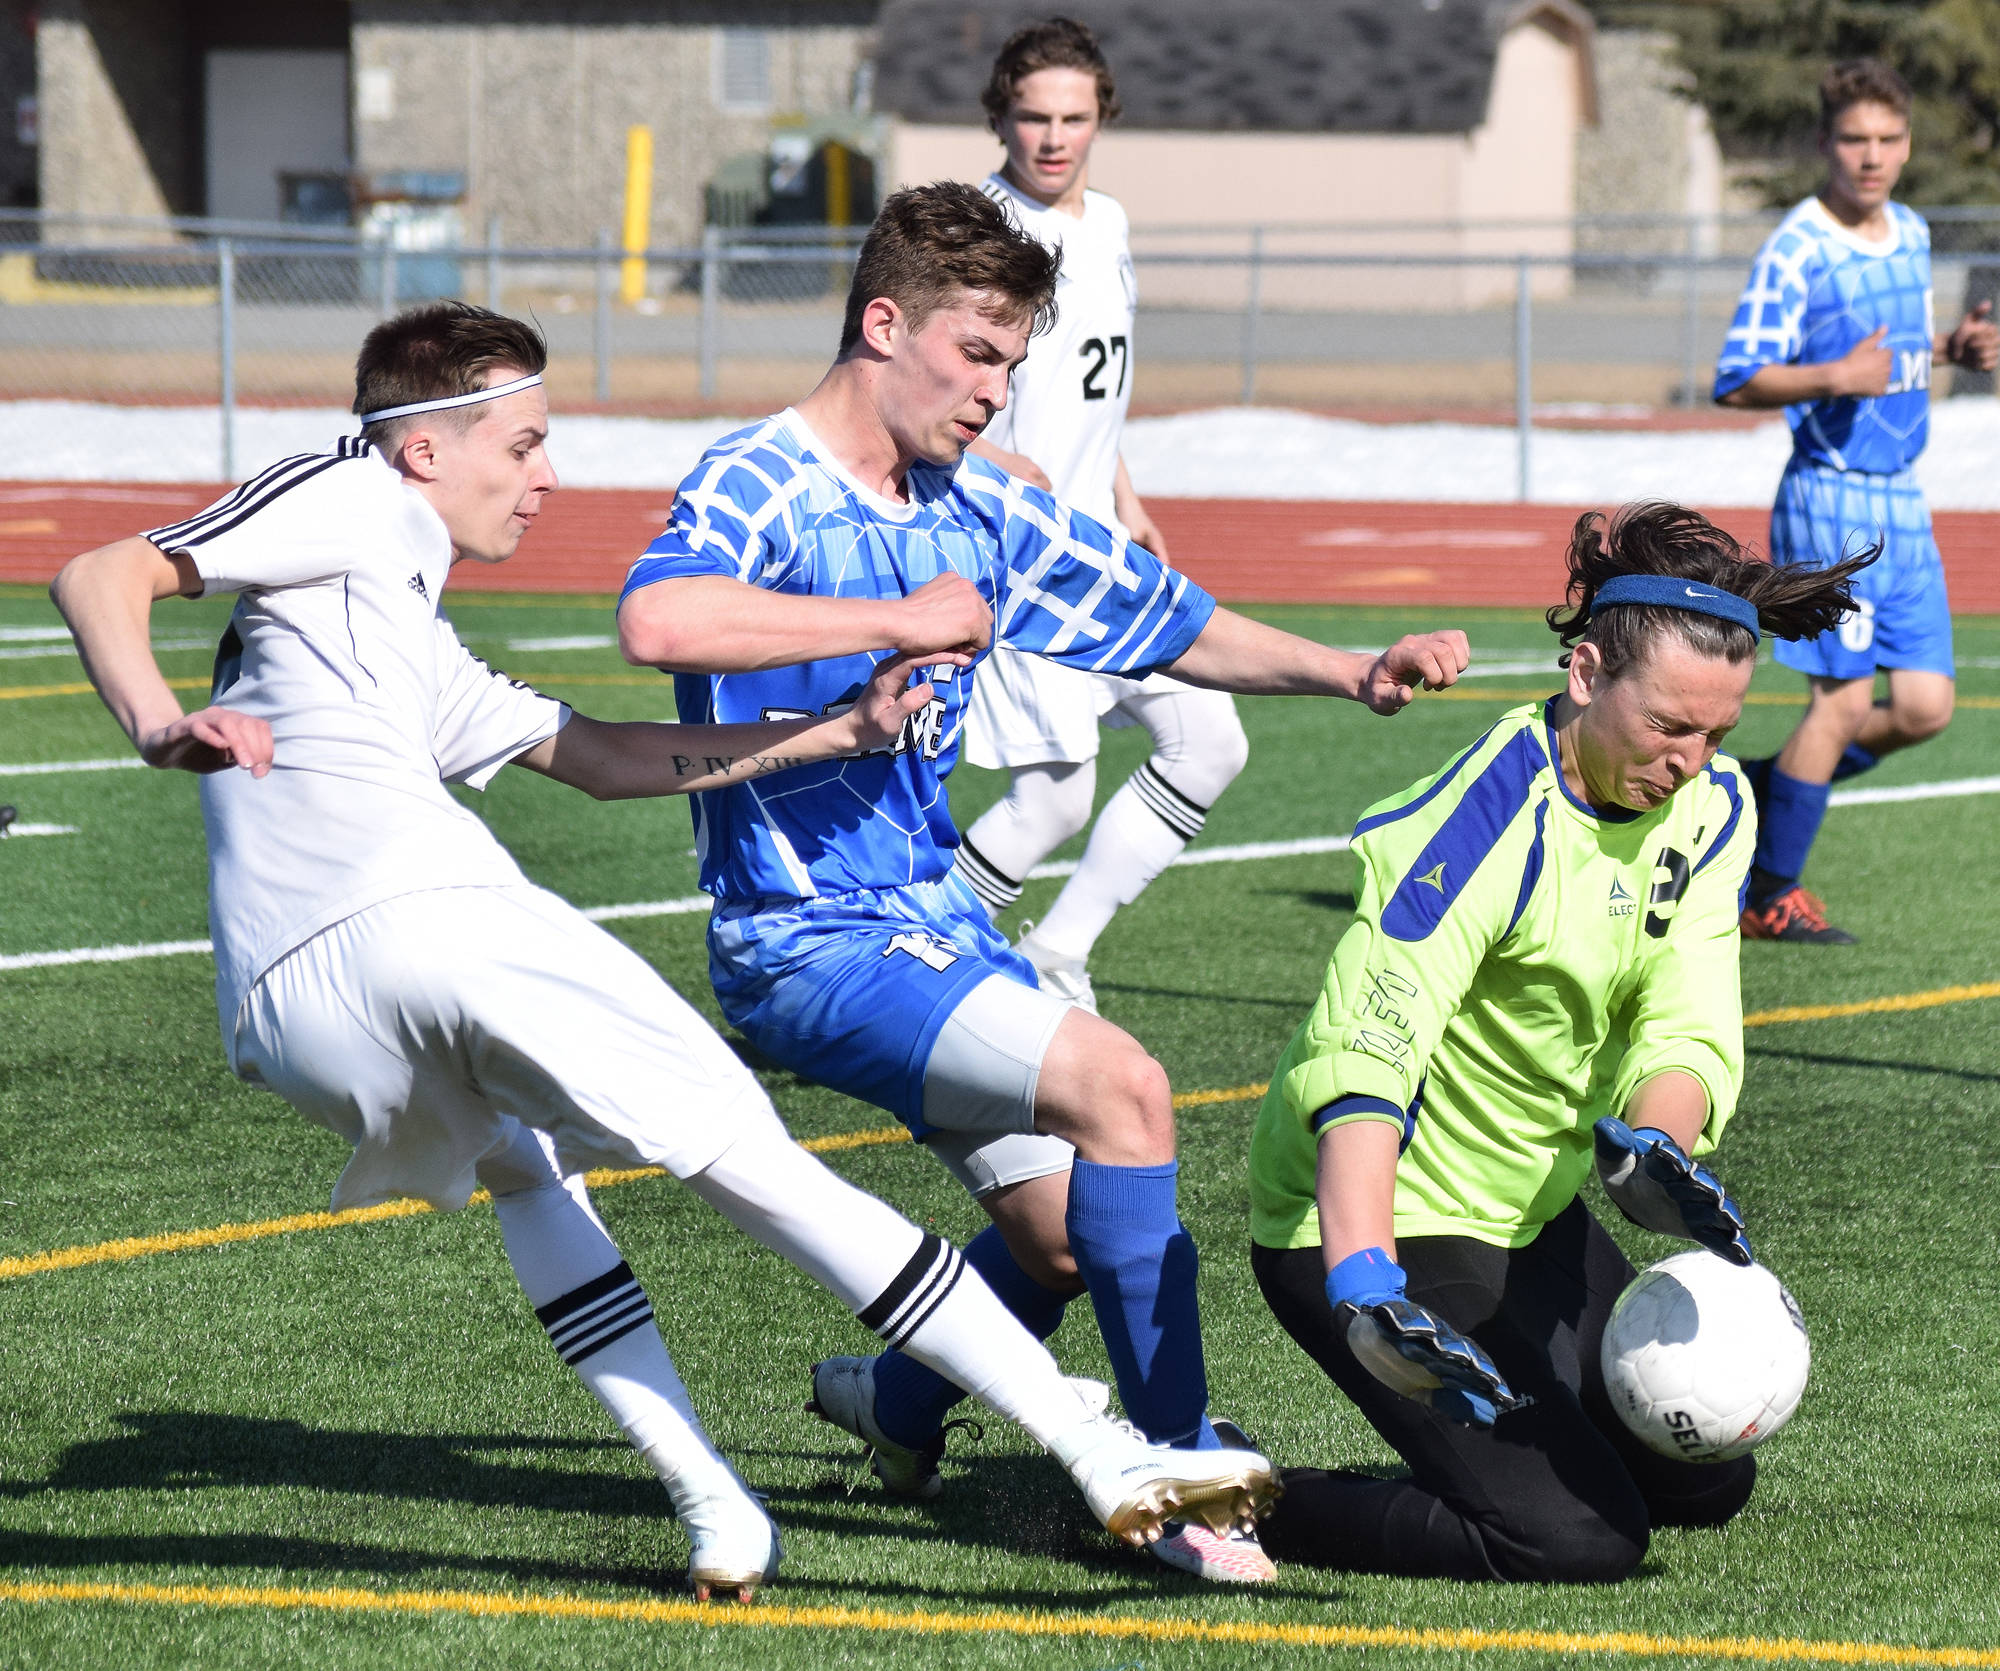 Palmer goalkeeper Caden Brown (right) wards off an offensive attack from Kenai Central’s Kalvin Daniels (left) while teammate Makeehan Knittle puts up a block, Saturday at Ed Hollier Field in Kenai. (Photo by Joey Klecka/Peninsula Clarion)